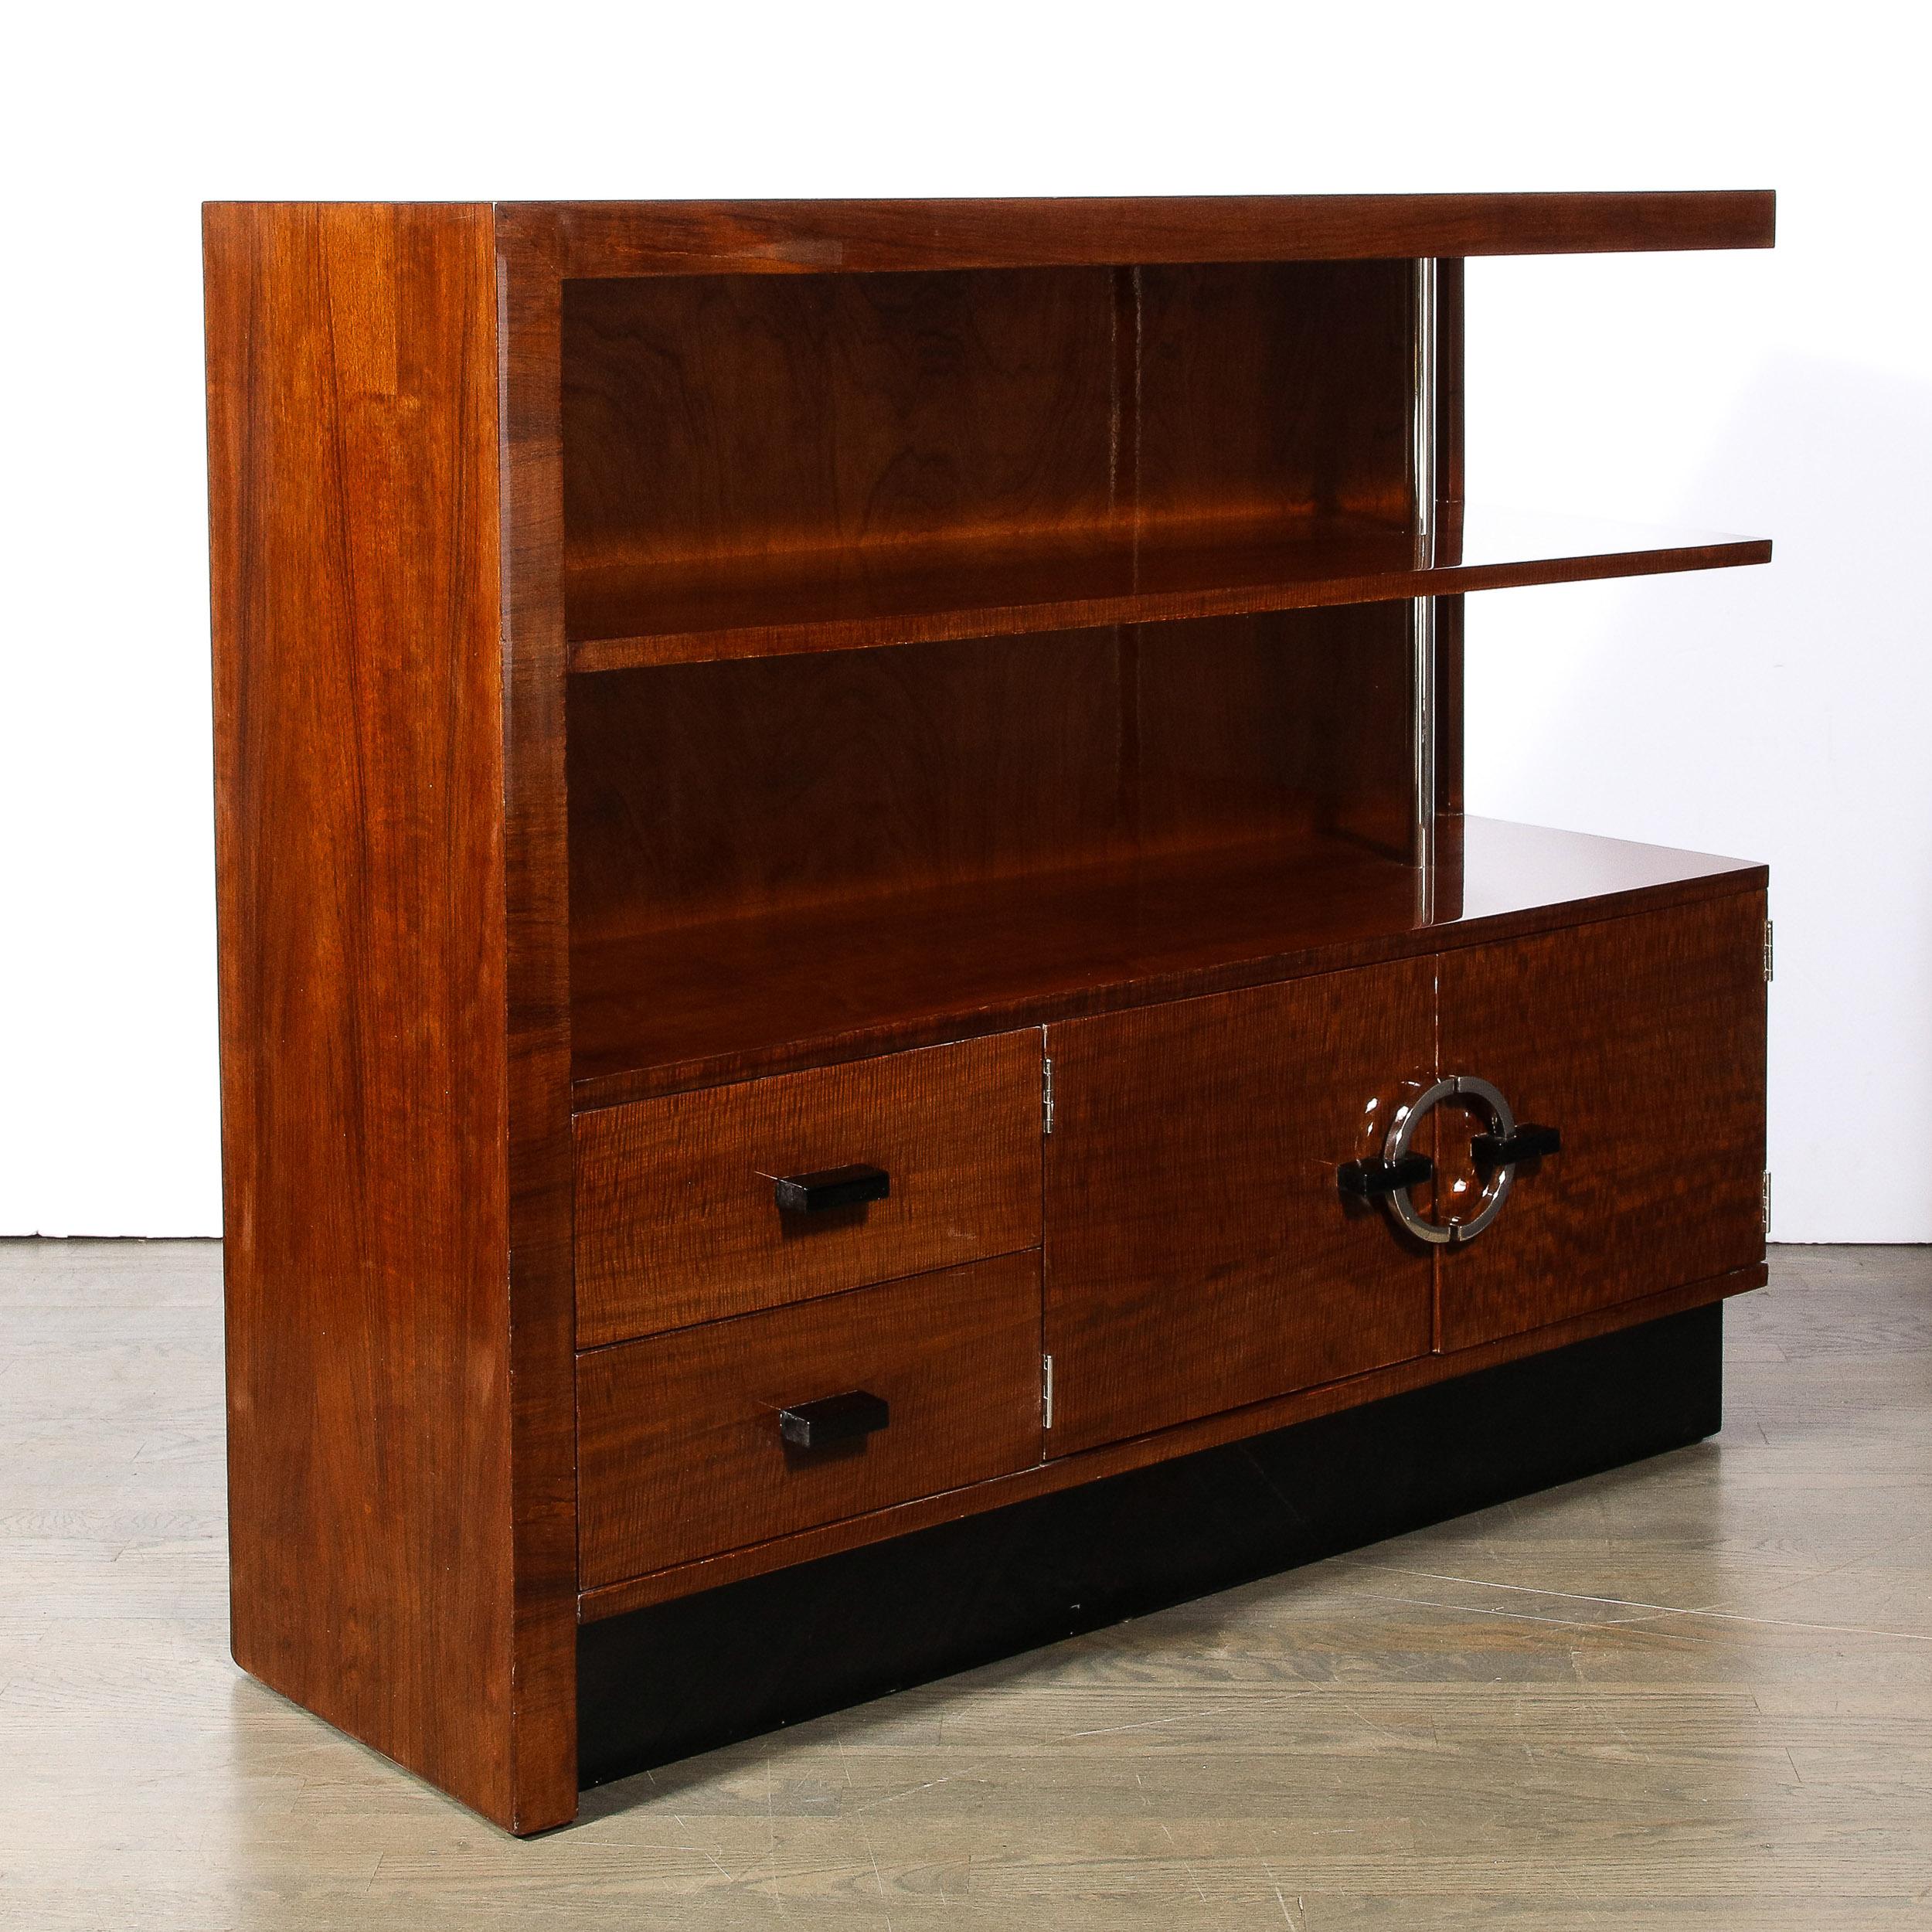 This well composed and materially stunning Art Deco Bookcase/Cabinet by Gilbert Rohde in East Indian Laurel for the Herman Miller Company- Model No. 344 originates from the United States, Circa 1940. . Composed in a distinctive cut of East Indian